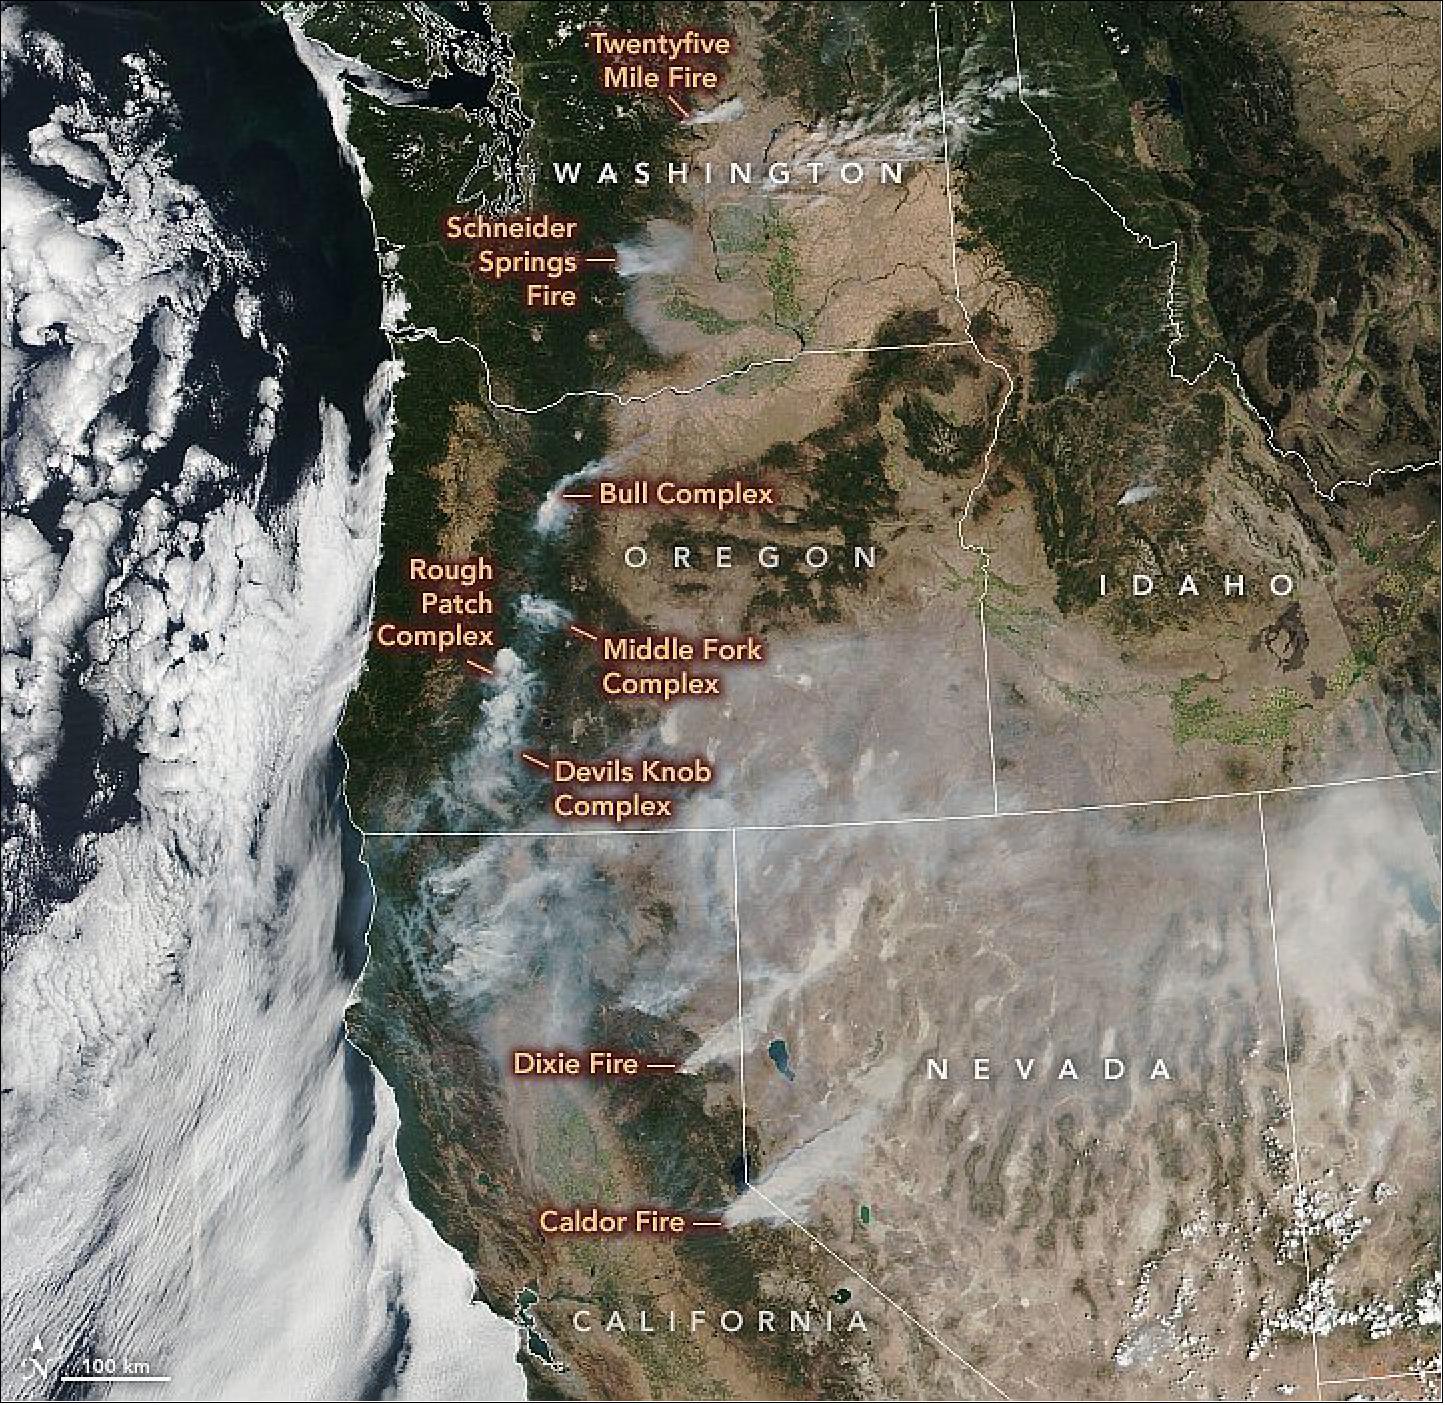 Figure 18: While the Caldor and Dixie fires are the largest, other wildfires are also posing hazards to people, property, and air quality across the U.S. West. On August 29, 2021, the Visible Infrared Imaging Radiometer Suite (VIIRS) on the NOAA-NASA Suomi NPP satellite acquired this image showing the ominous arc of fires across Washington, Oregon, and California (image credit: NASA Earth Observatory)